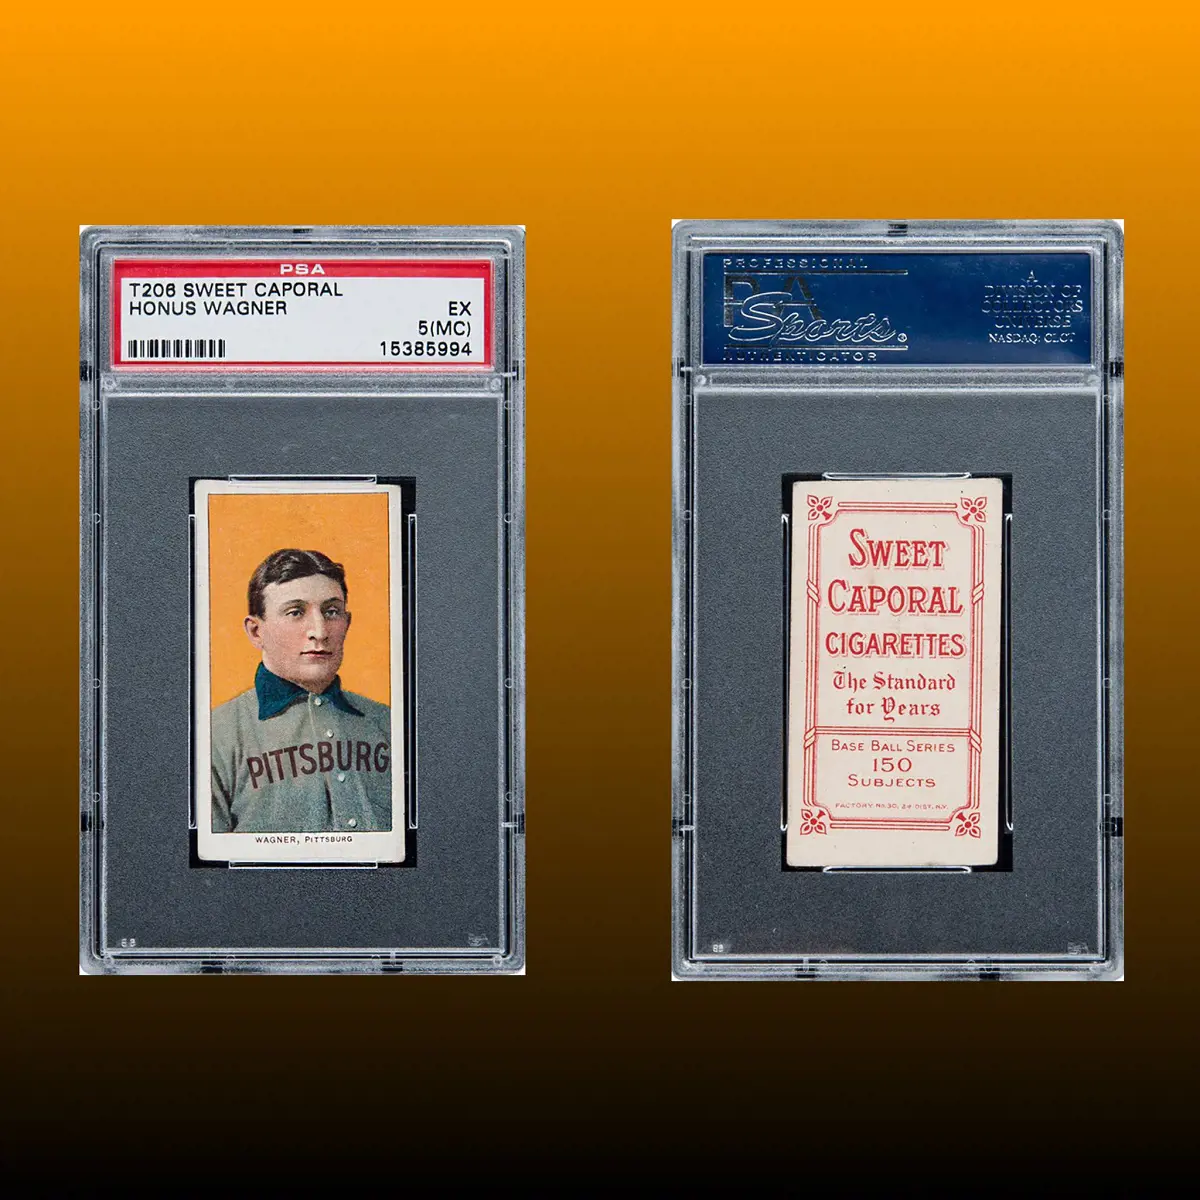 Jumbo T206 Honus Wagner Card was sold by the Goldin Auction in 2016.